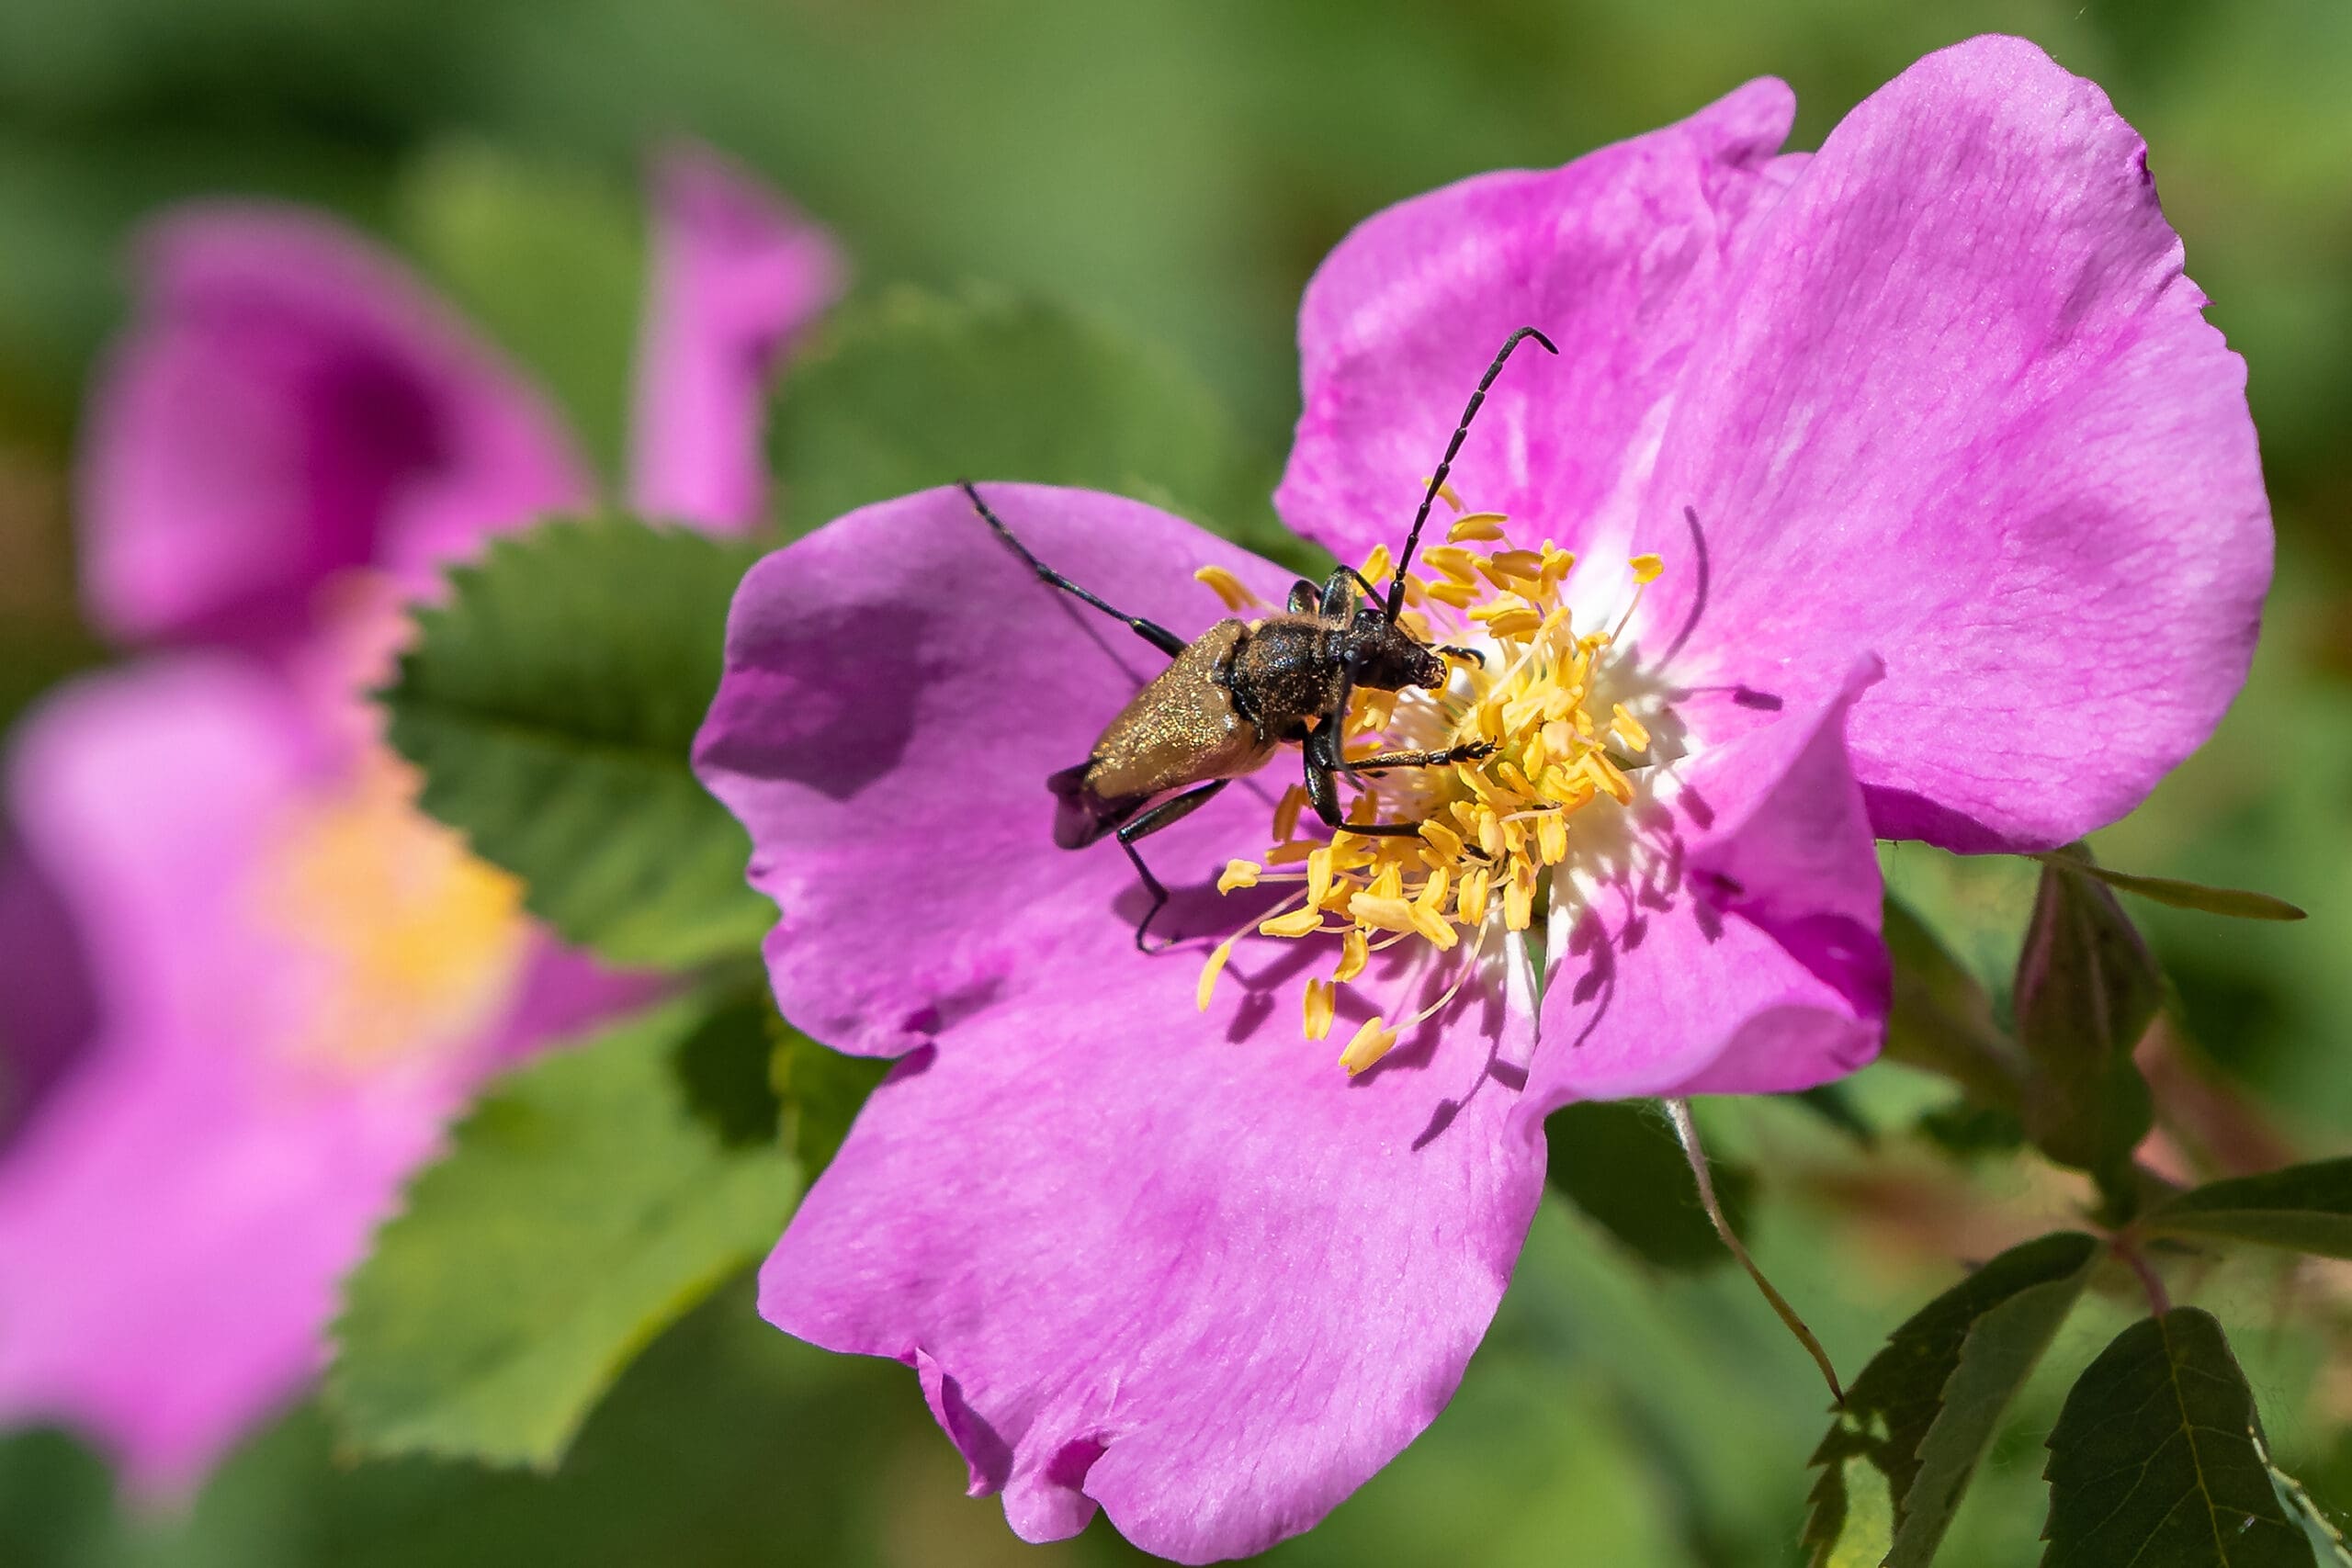 Pollinating insect on a wild rose.